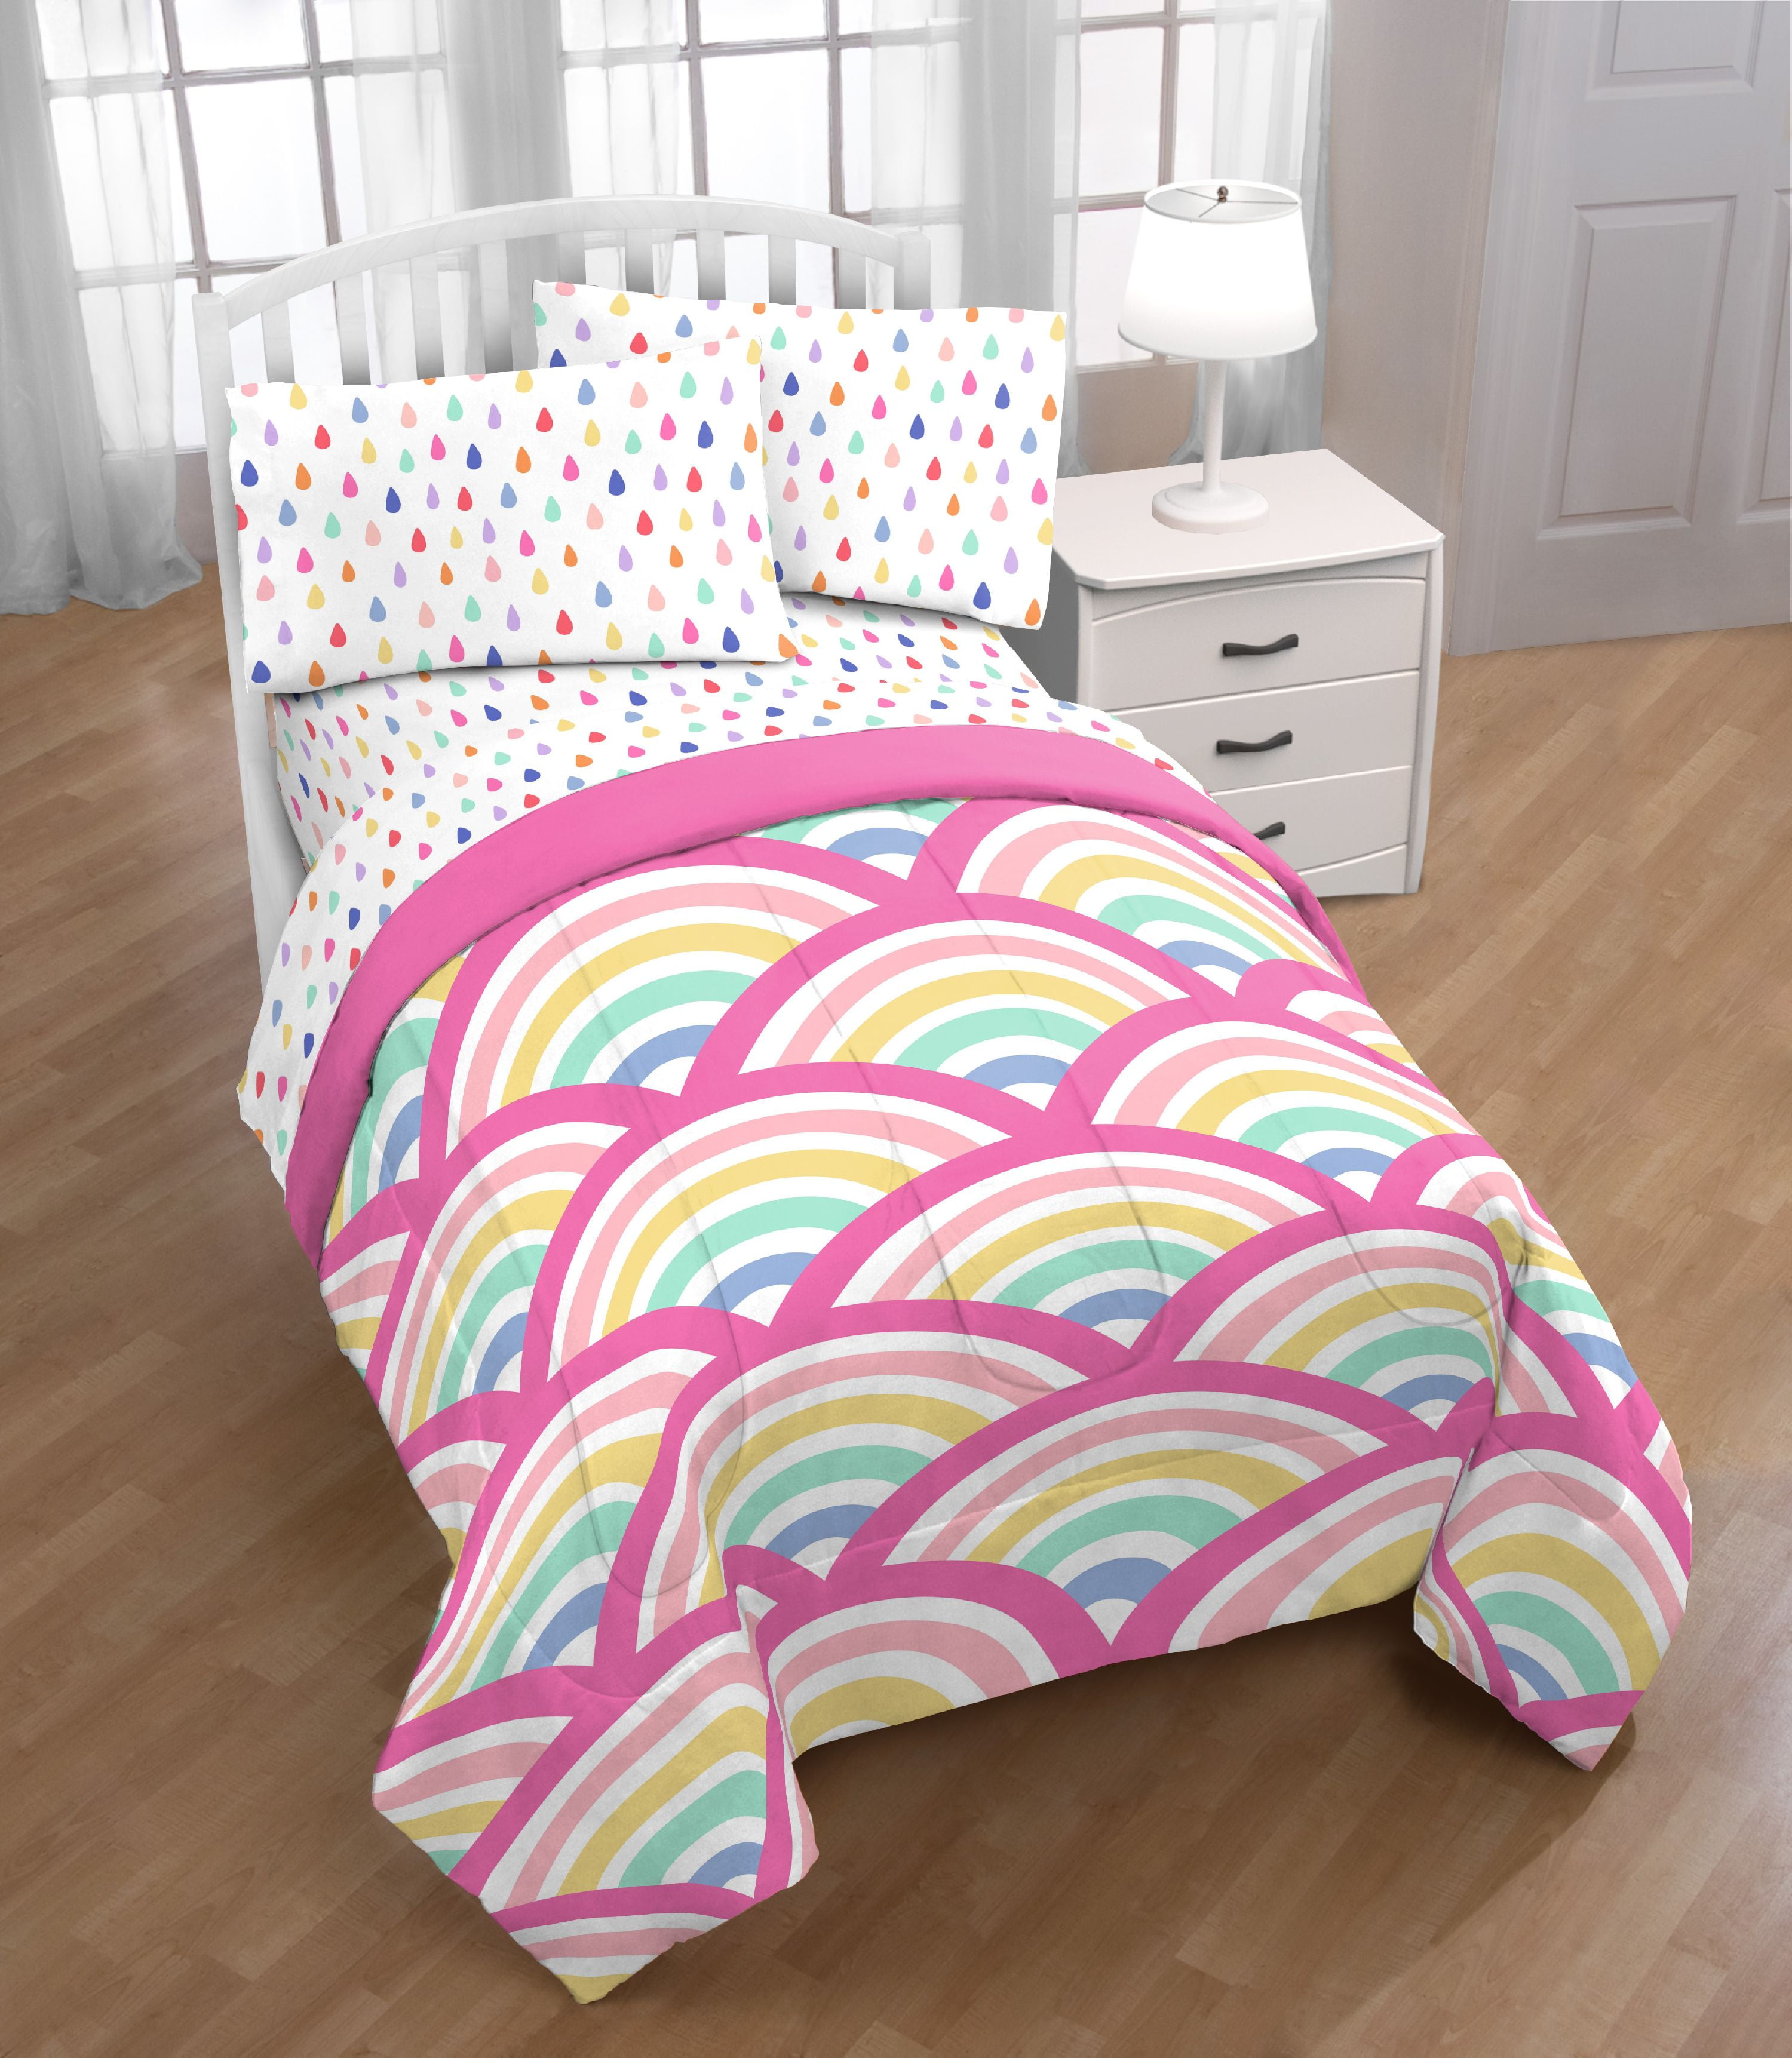 twin bedding for girl